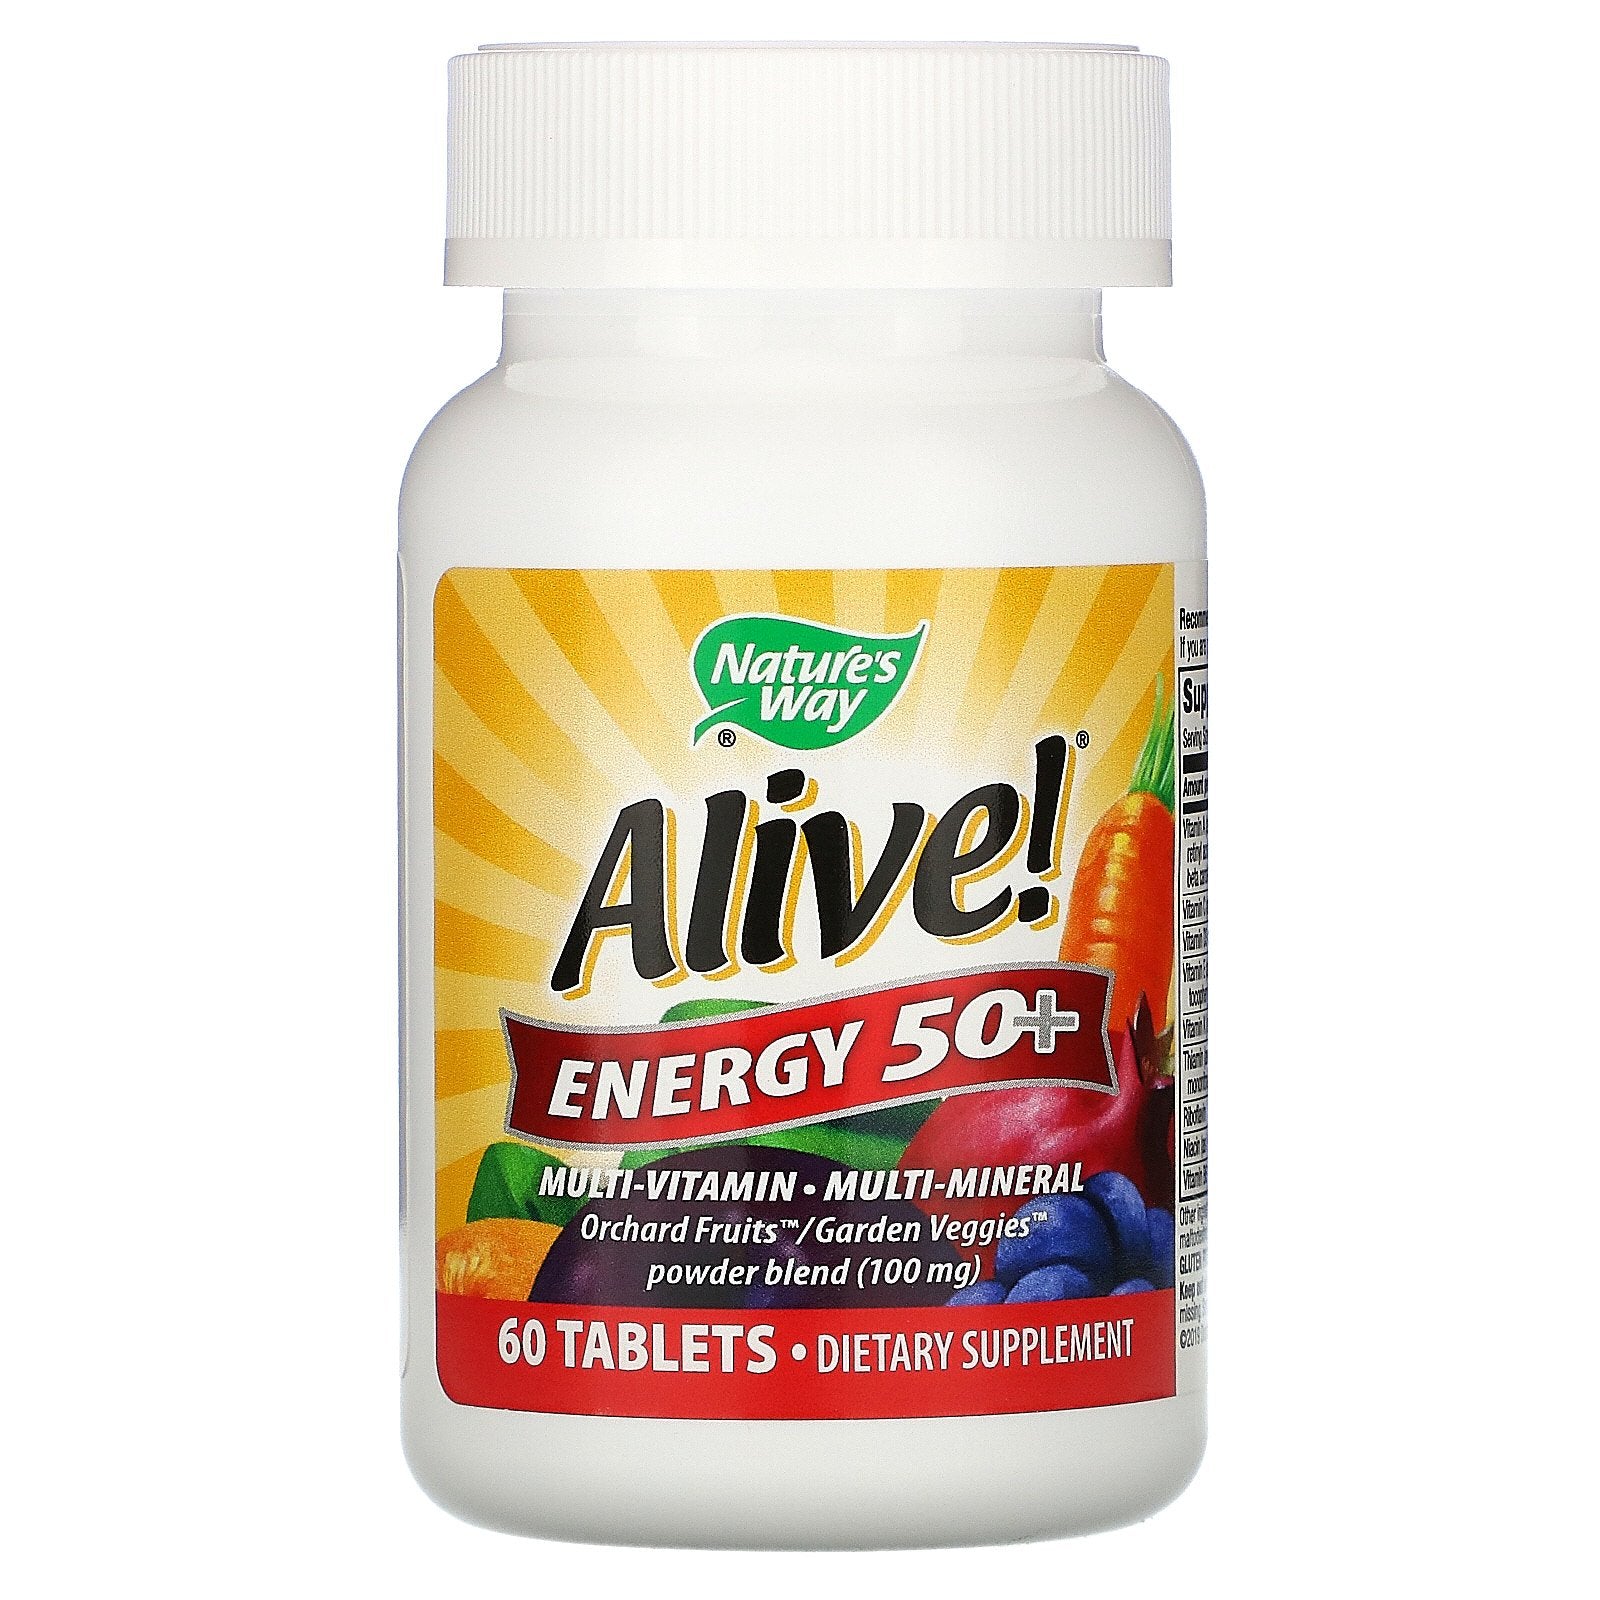 Nature's Way, Alive! Energy 50+, Multi-Vitamin-Multi-Mineral, Adults 50+, 60 Tablets